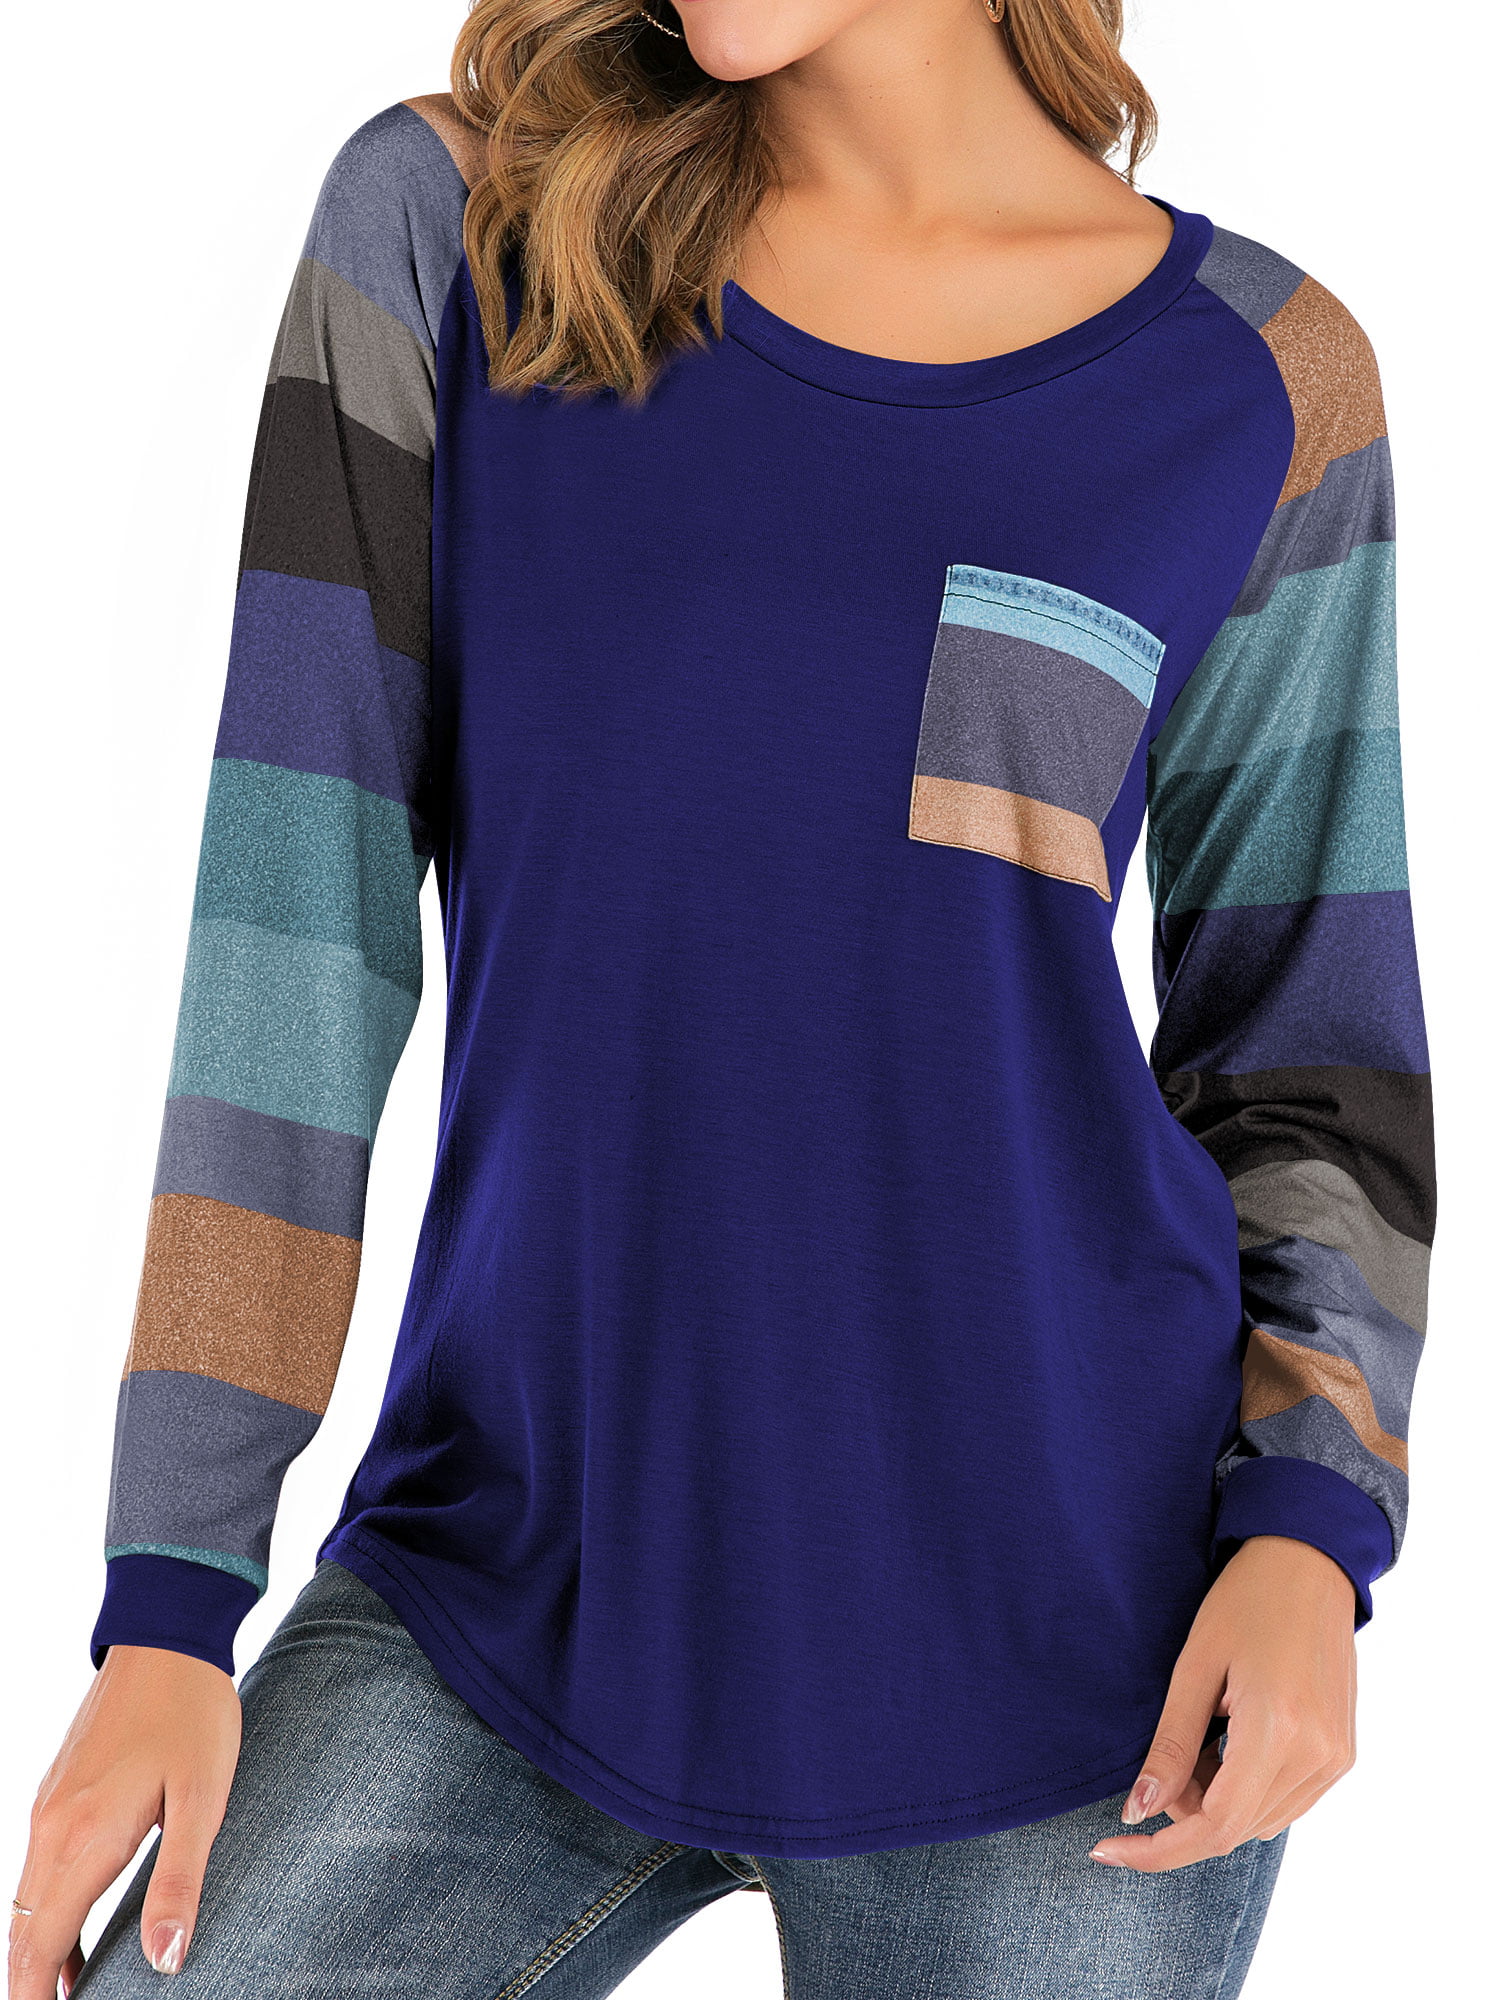 711ONLINESTORE - Women Round Neck Long Sleeves Color Block Tunic Shirt